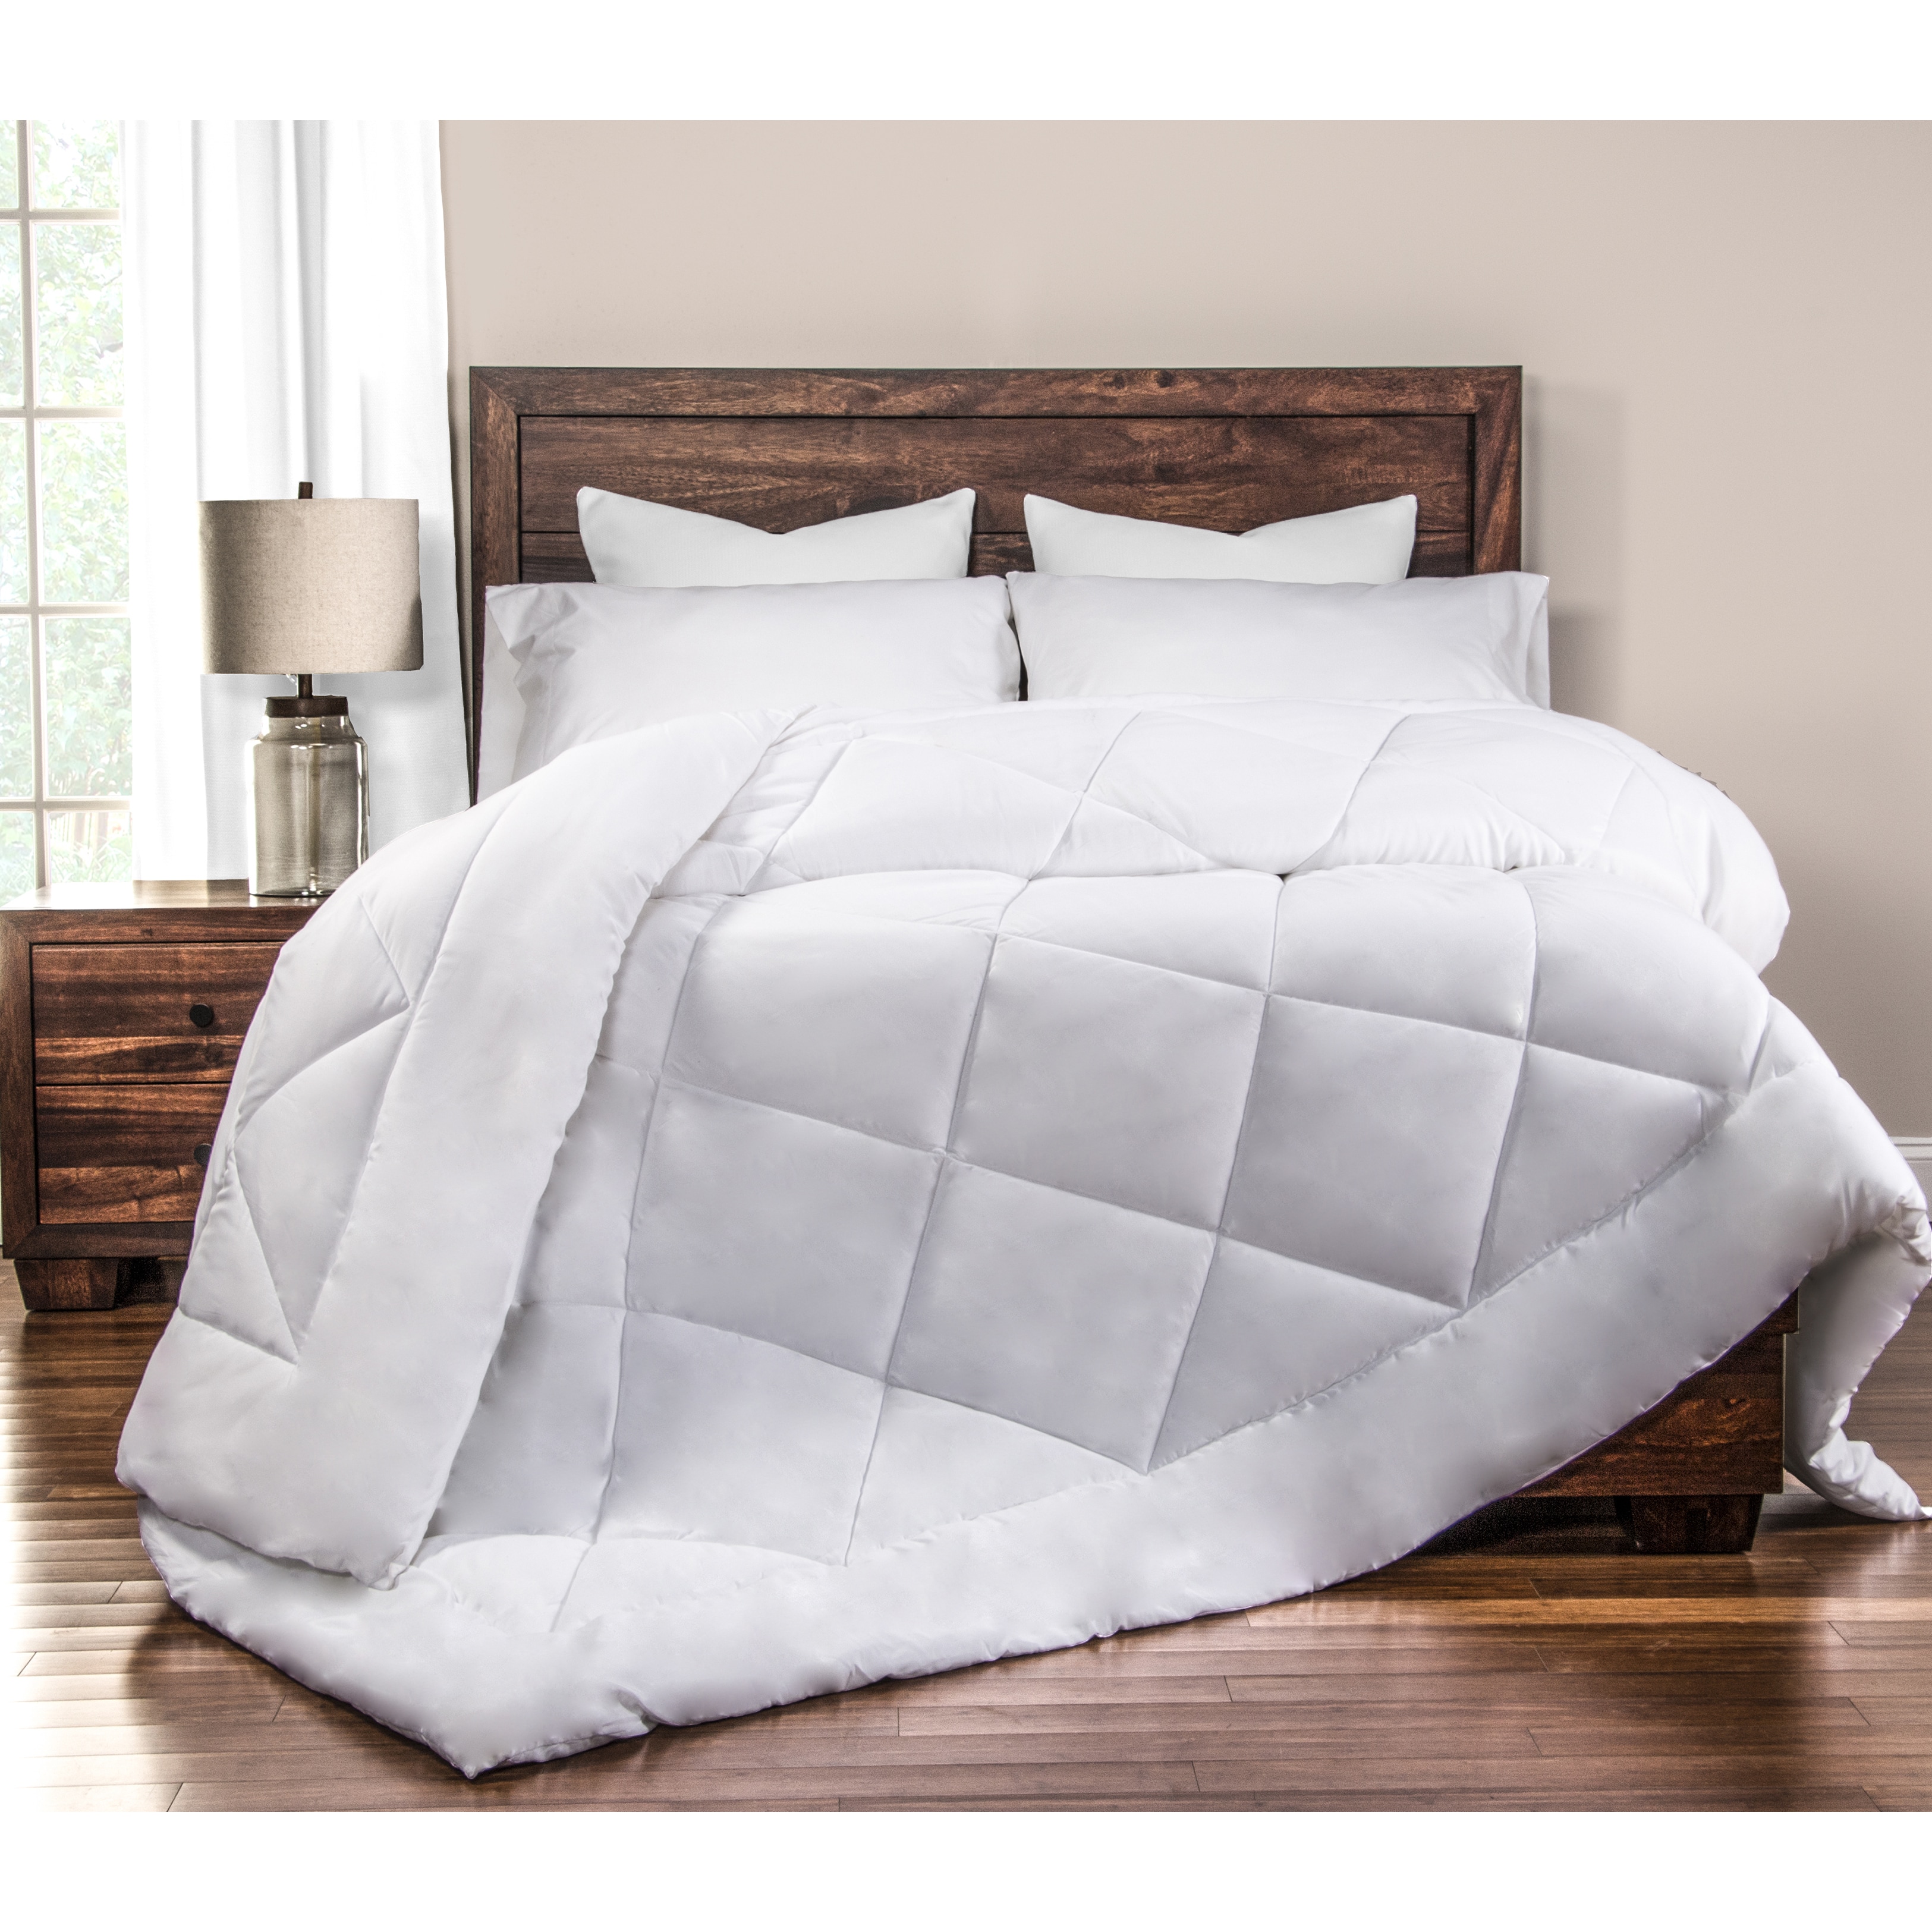 Shop Ultra Soft And Eco Friendly Down Alternative Comforter On